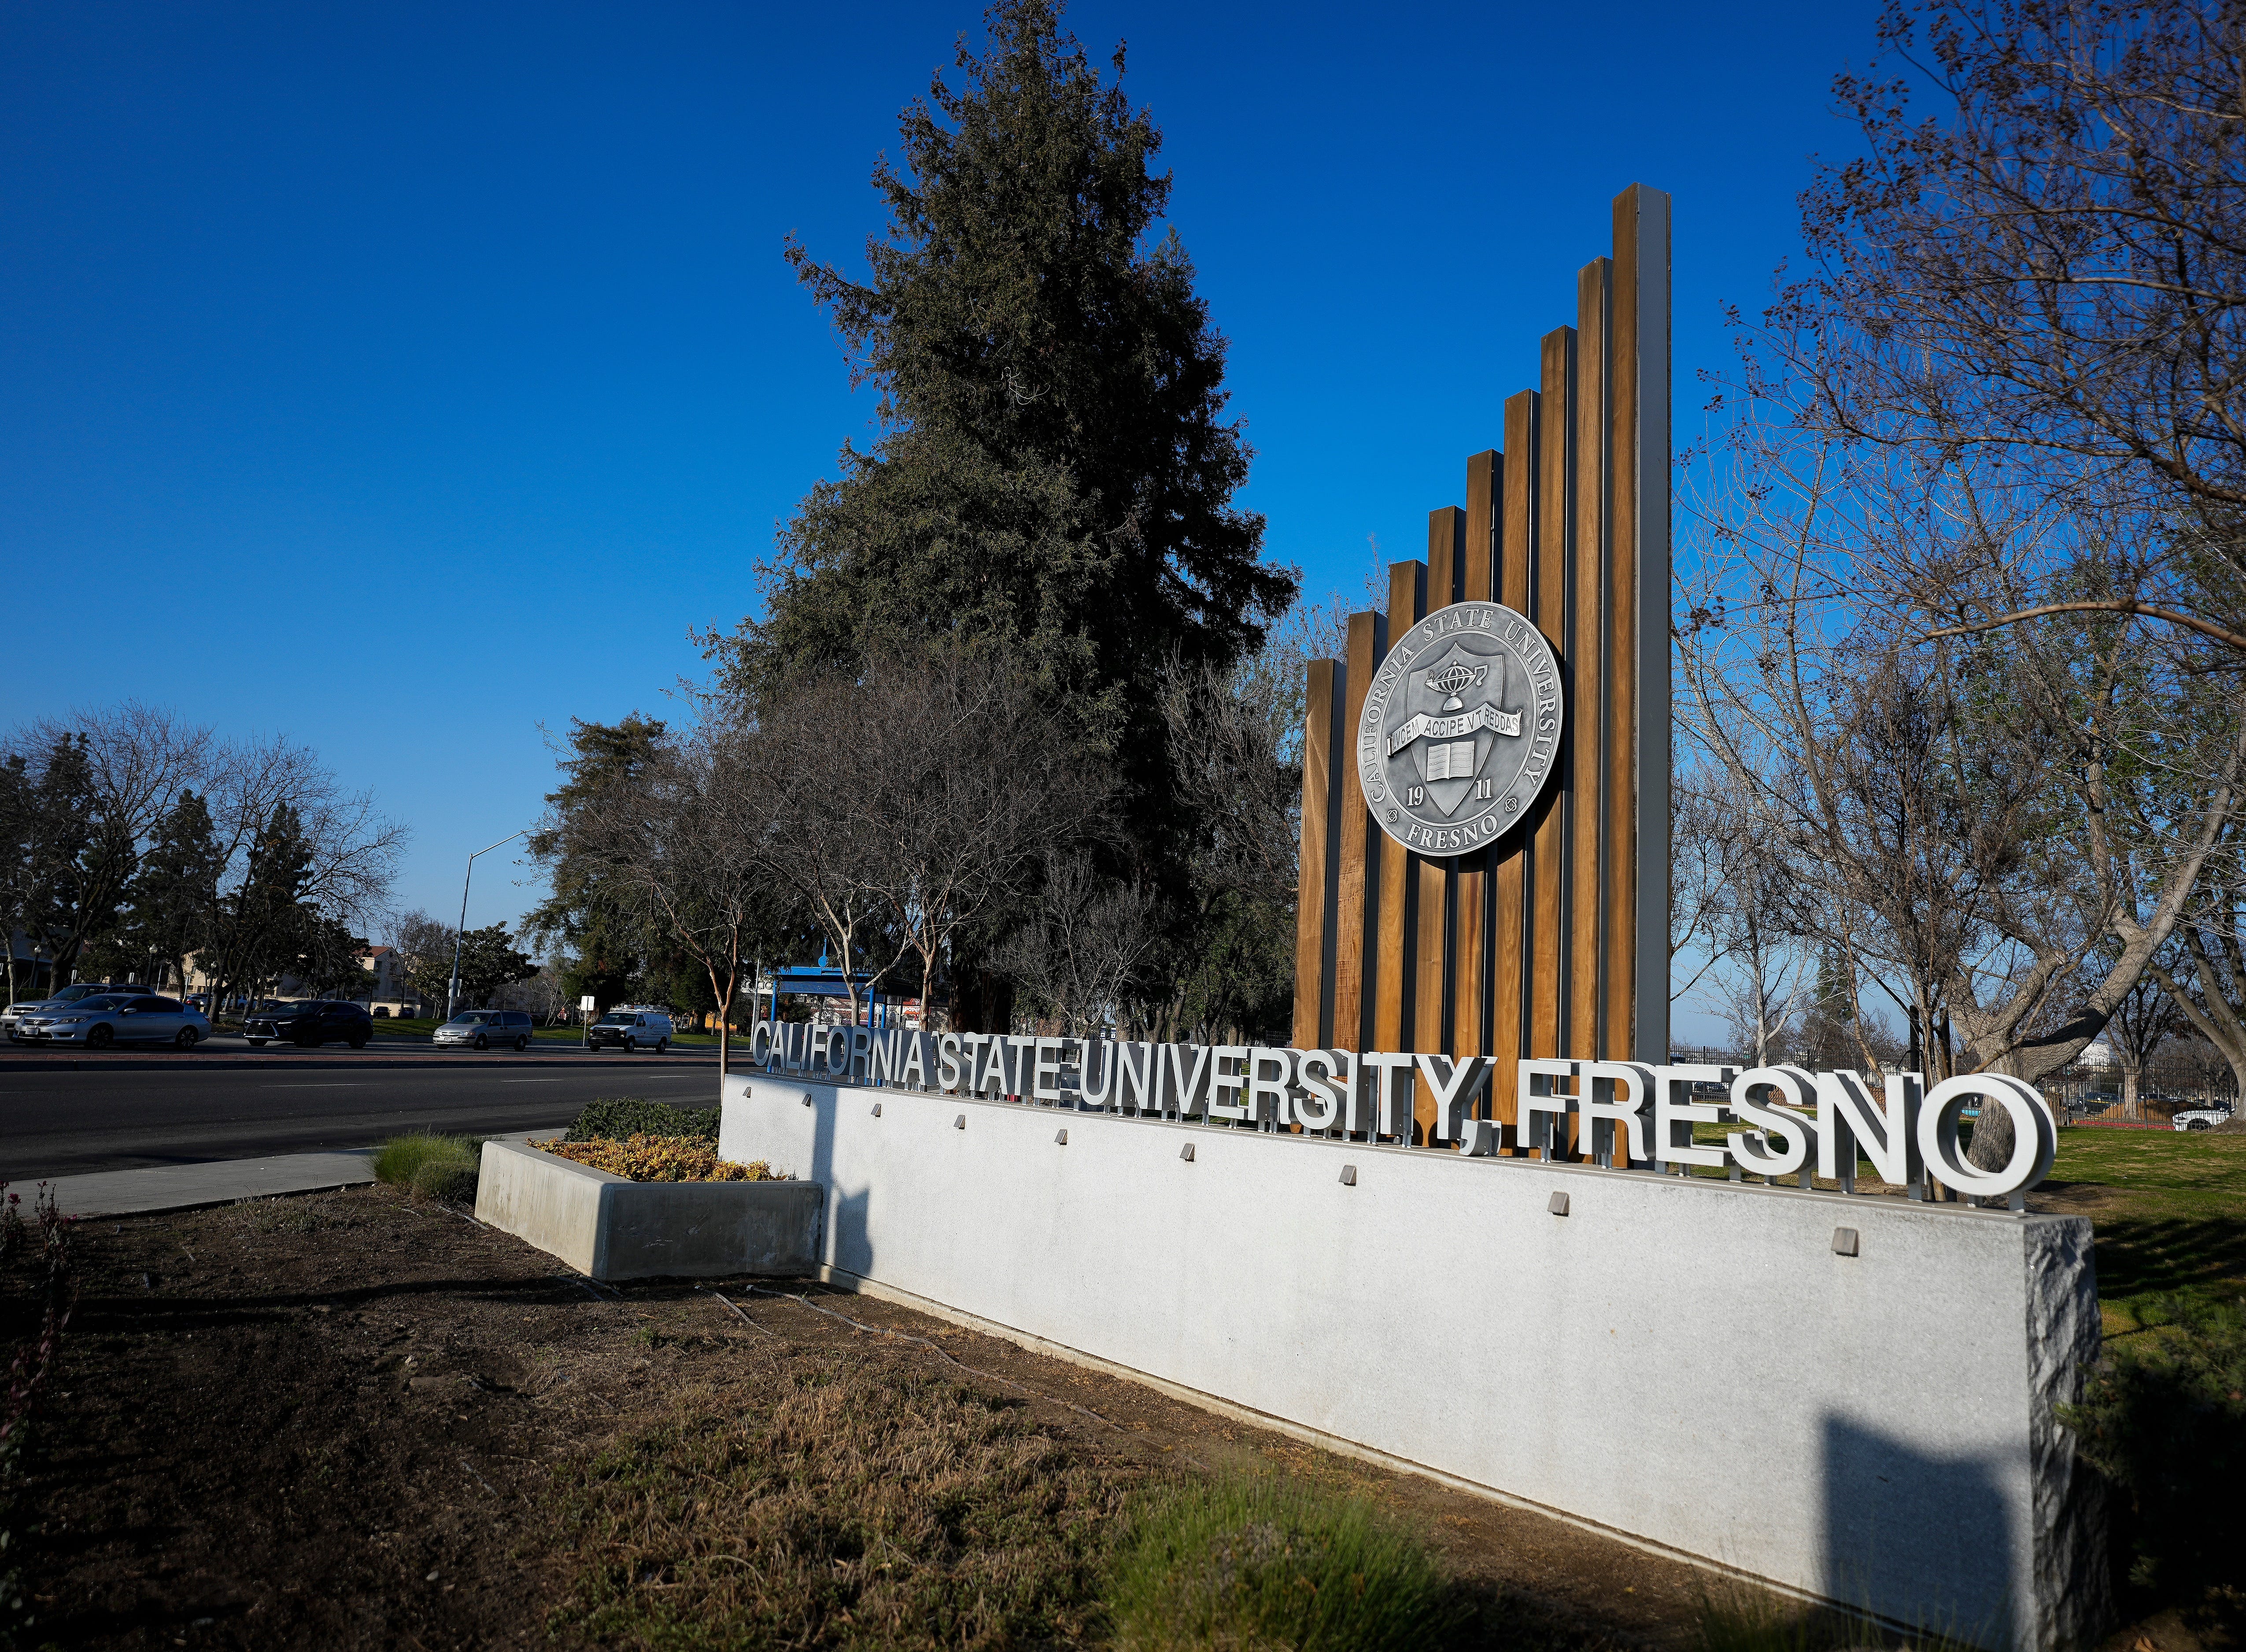 California State University, Fresno's main campus located at Cedar and Shaw Avenues in the northern part of the city.